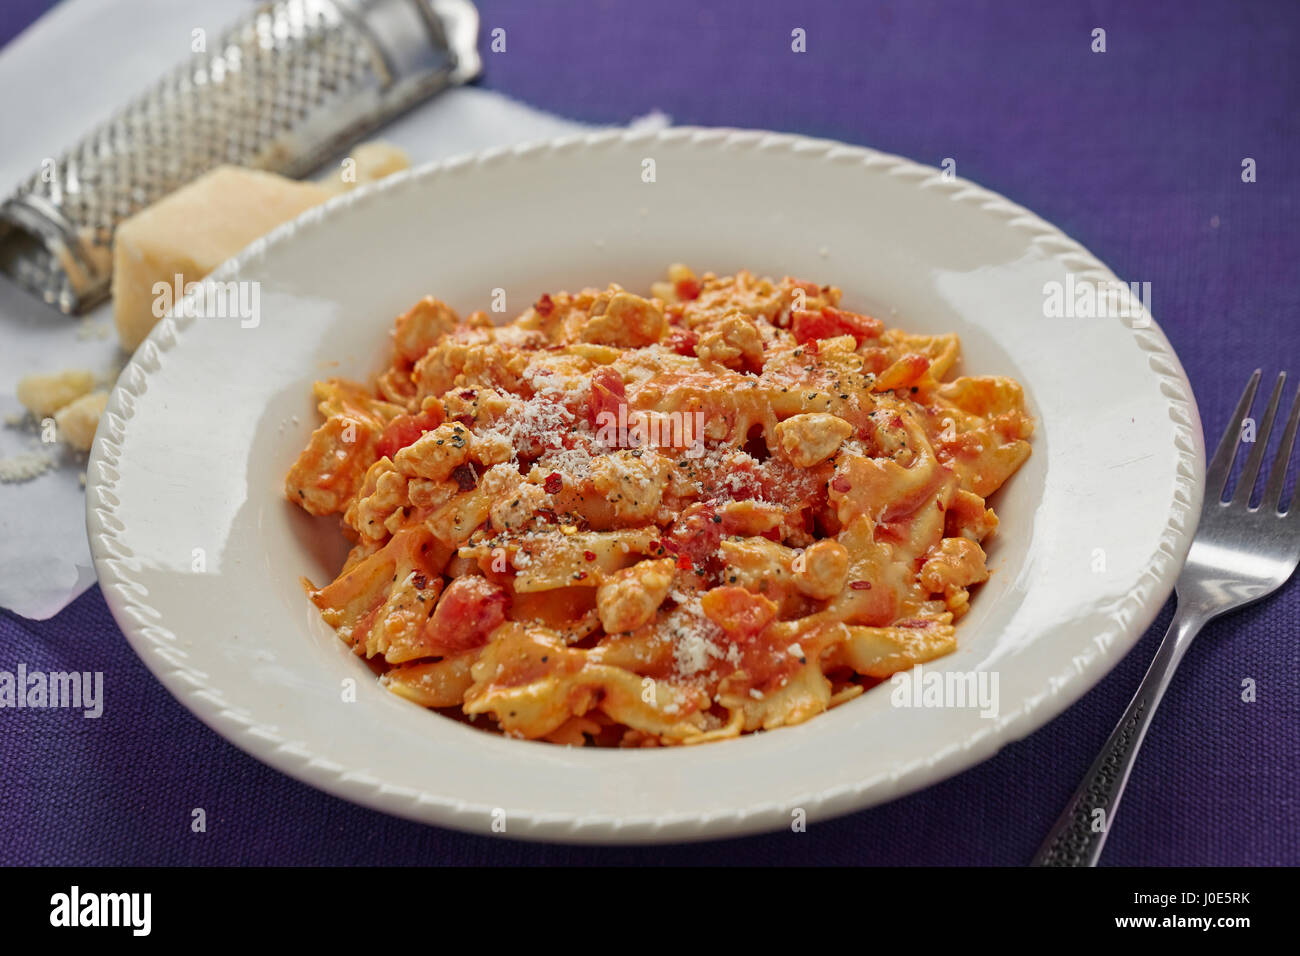 Pasta with tomato sauce and chicken pieces Stock Photo